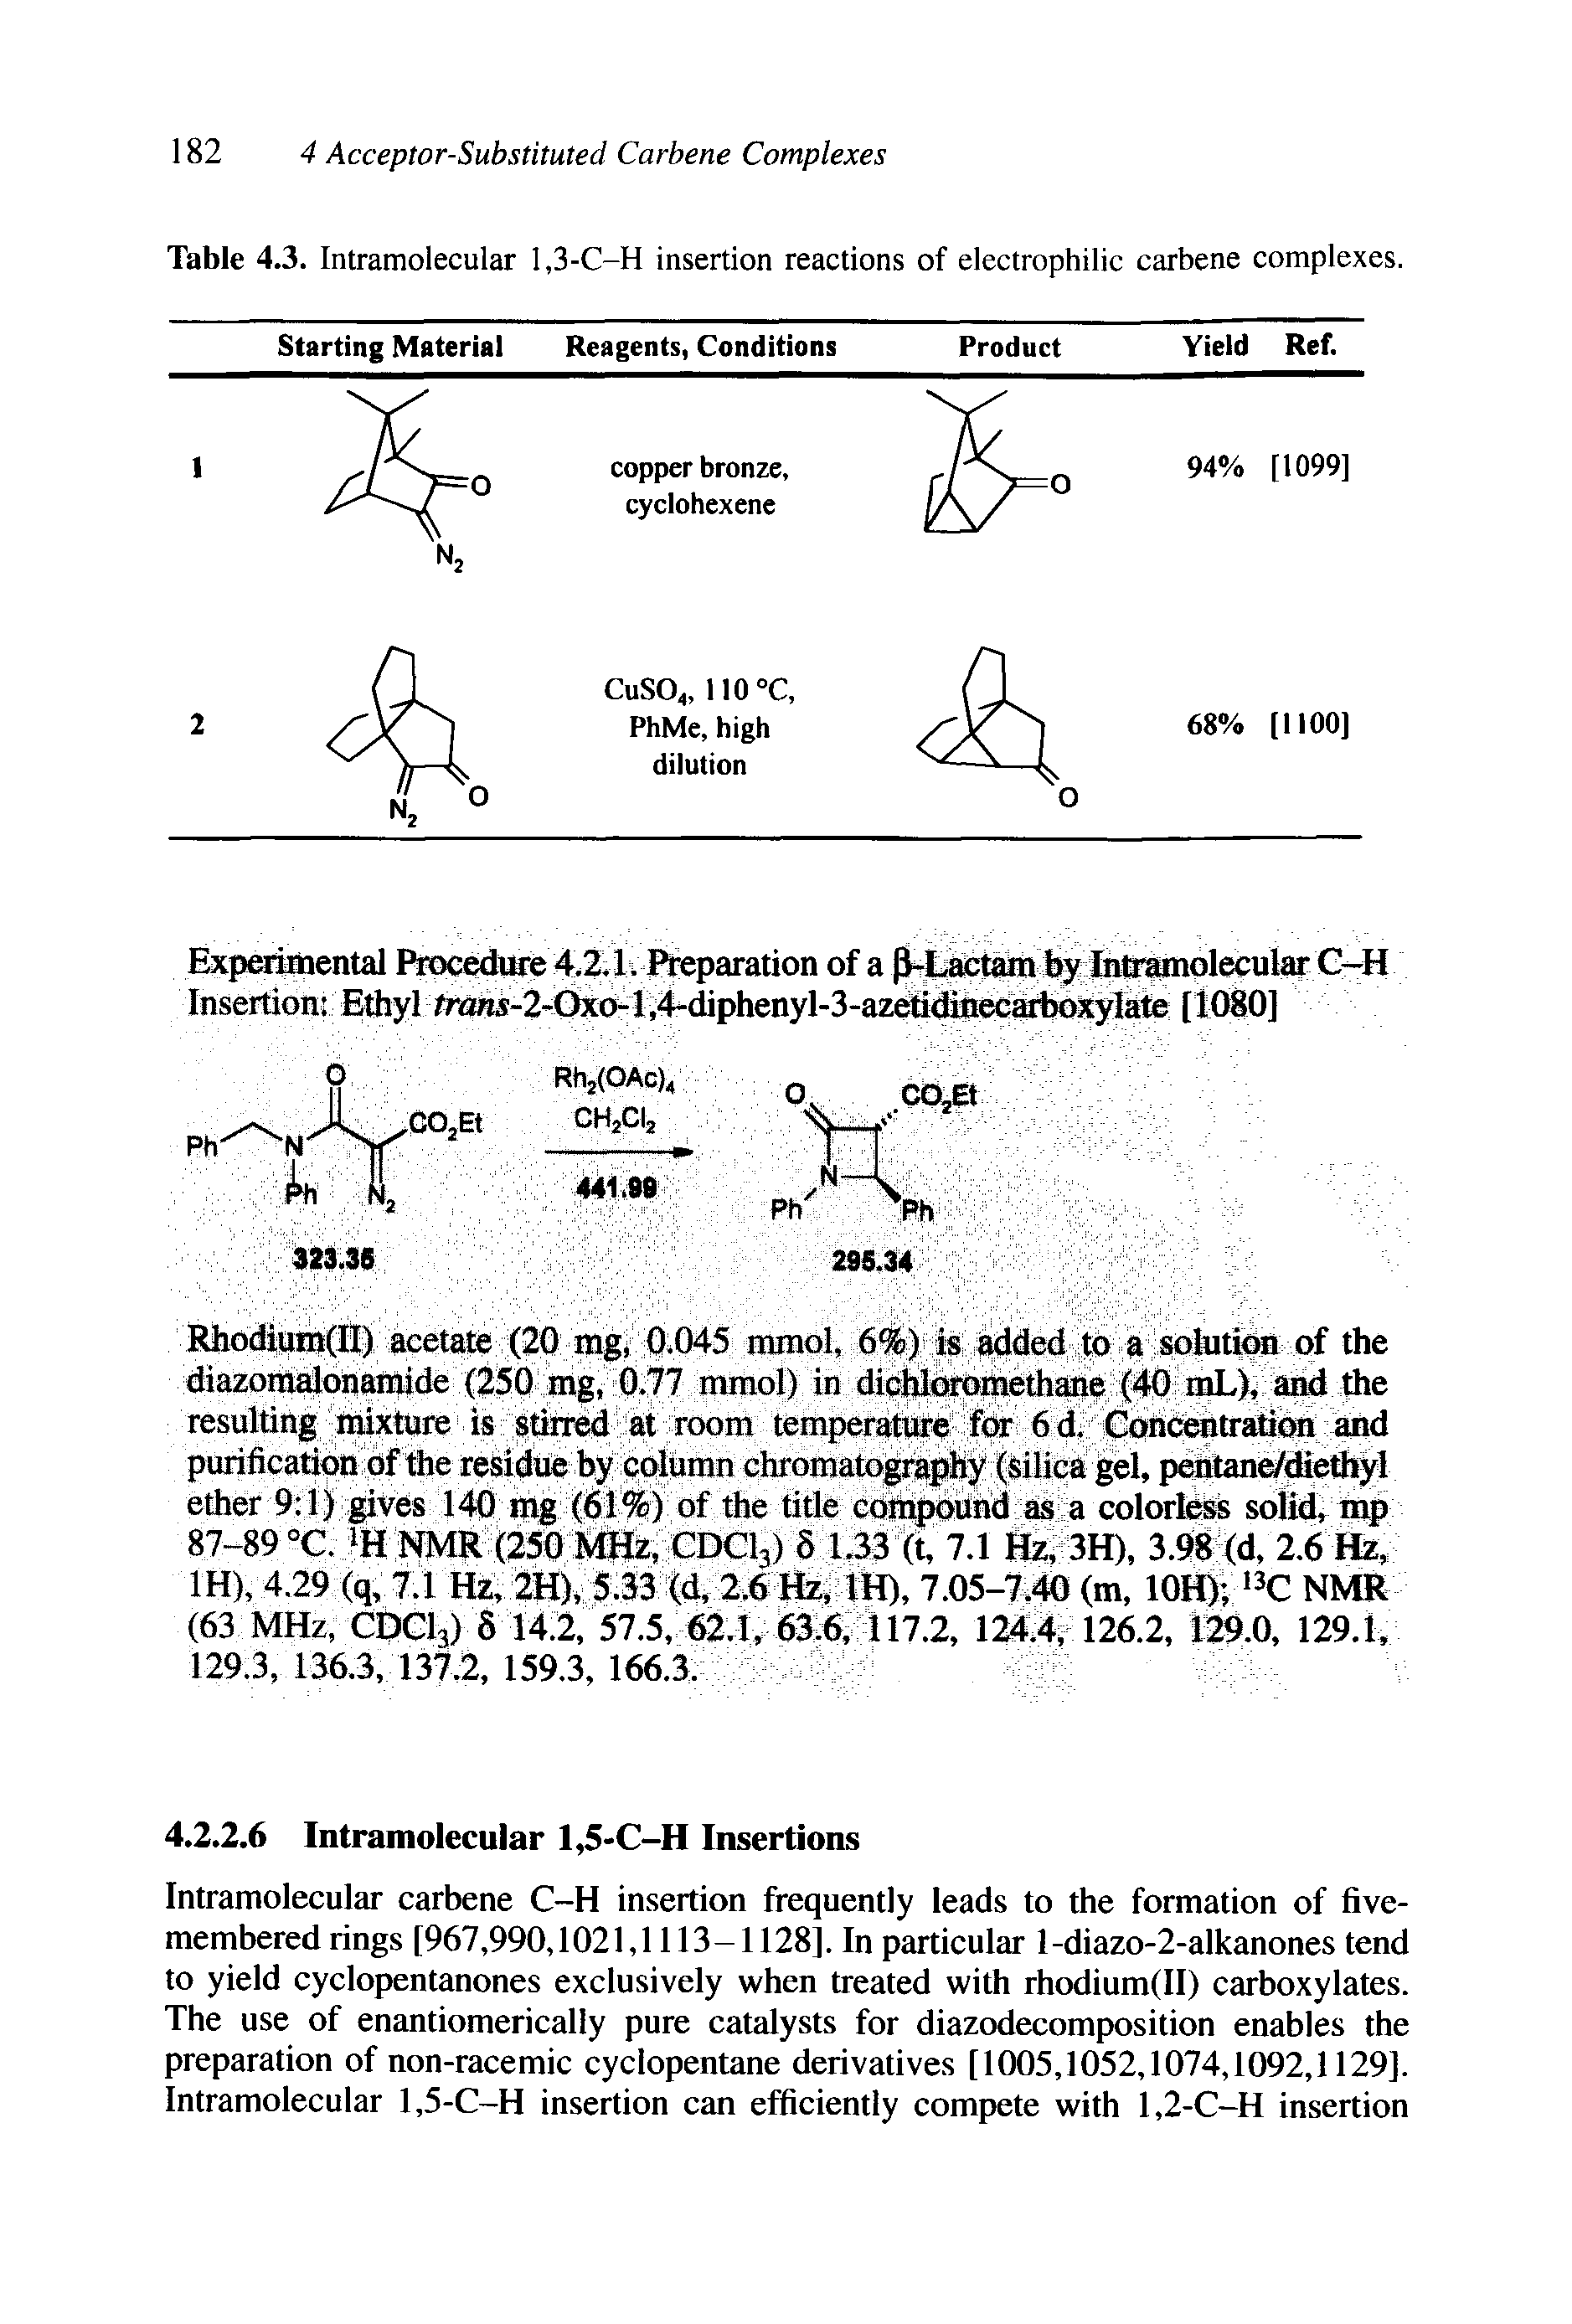 Table 4.3. Intramolecular 1,3-C-H insertion reactions of electrophilic carbene complexes.